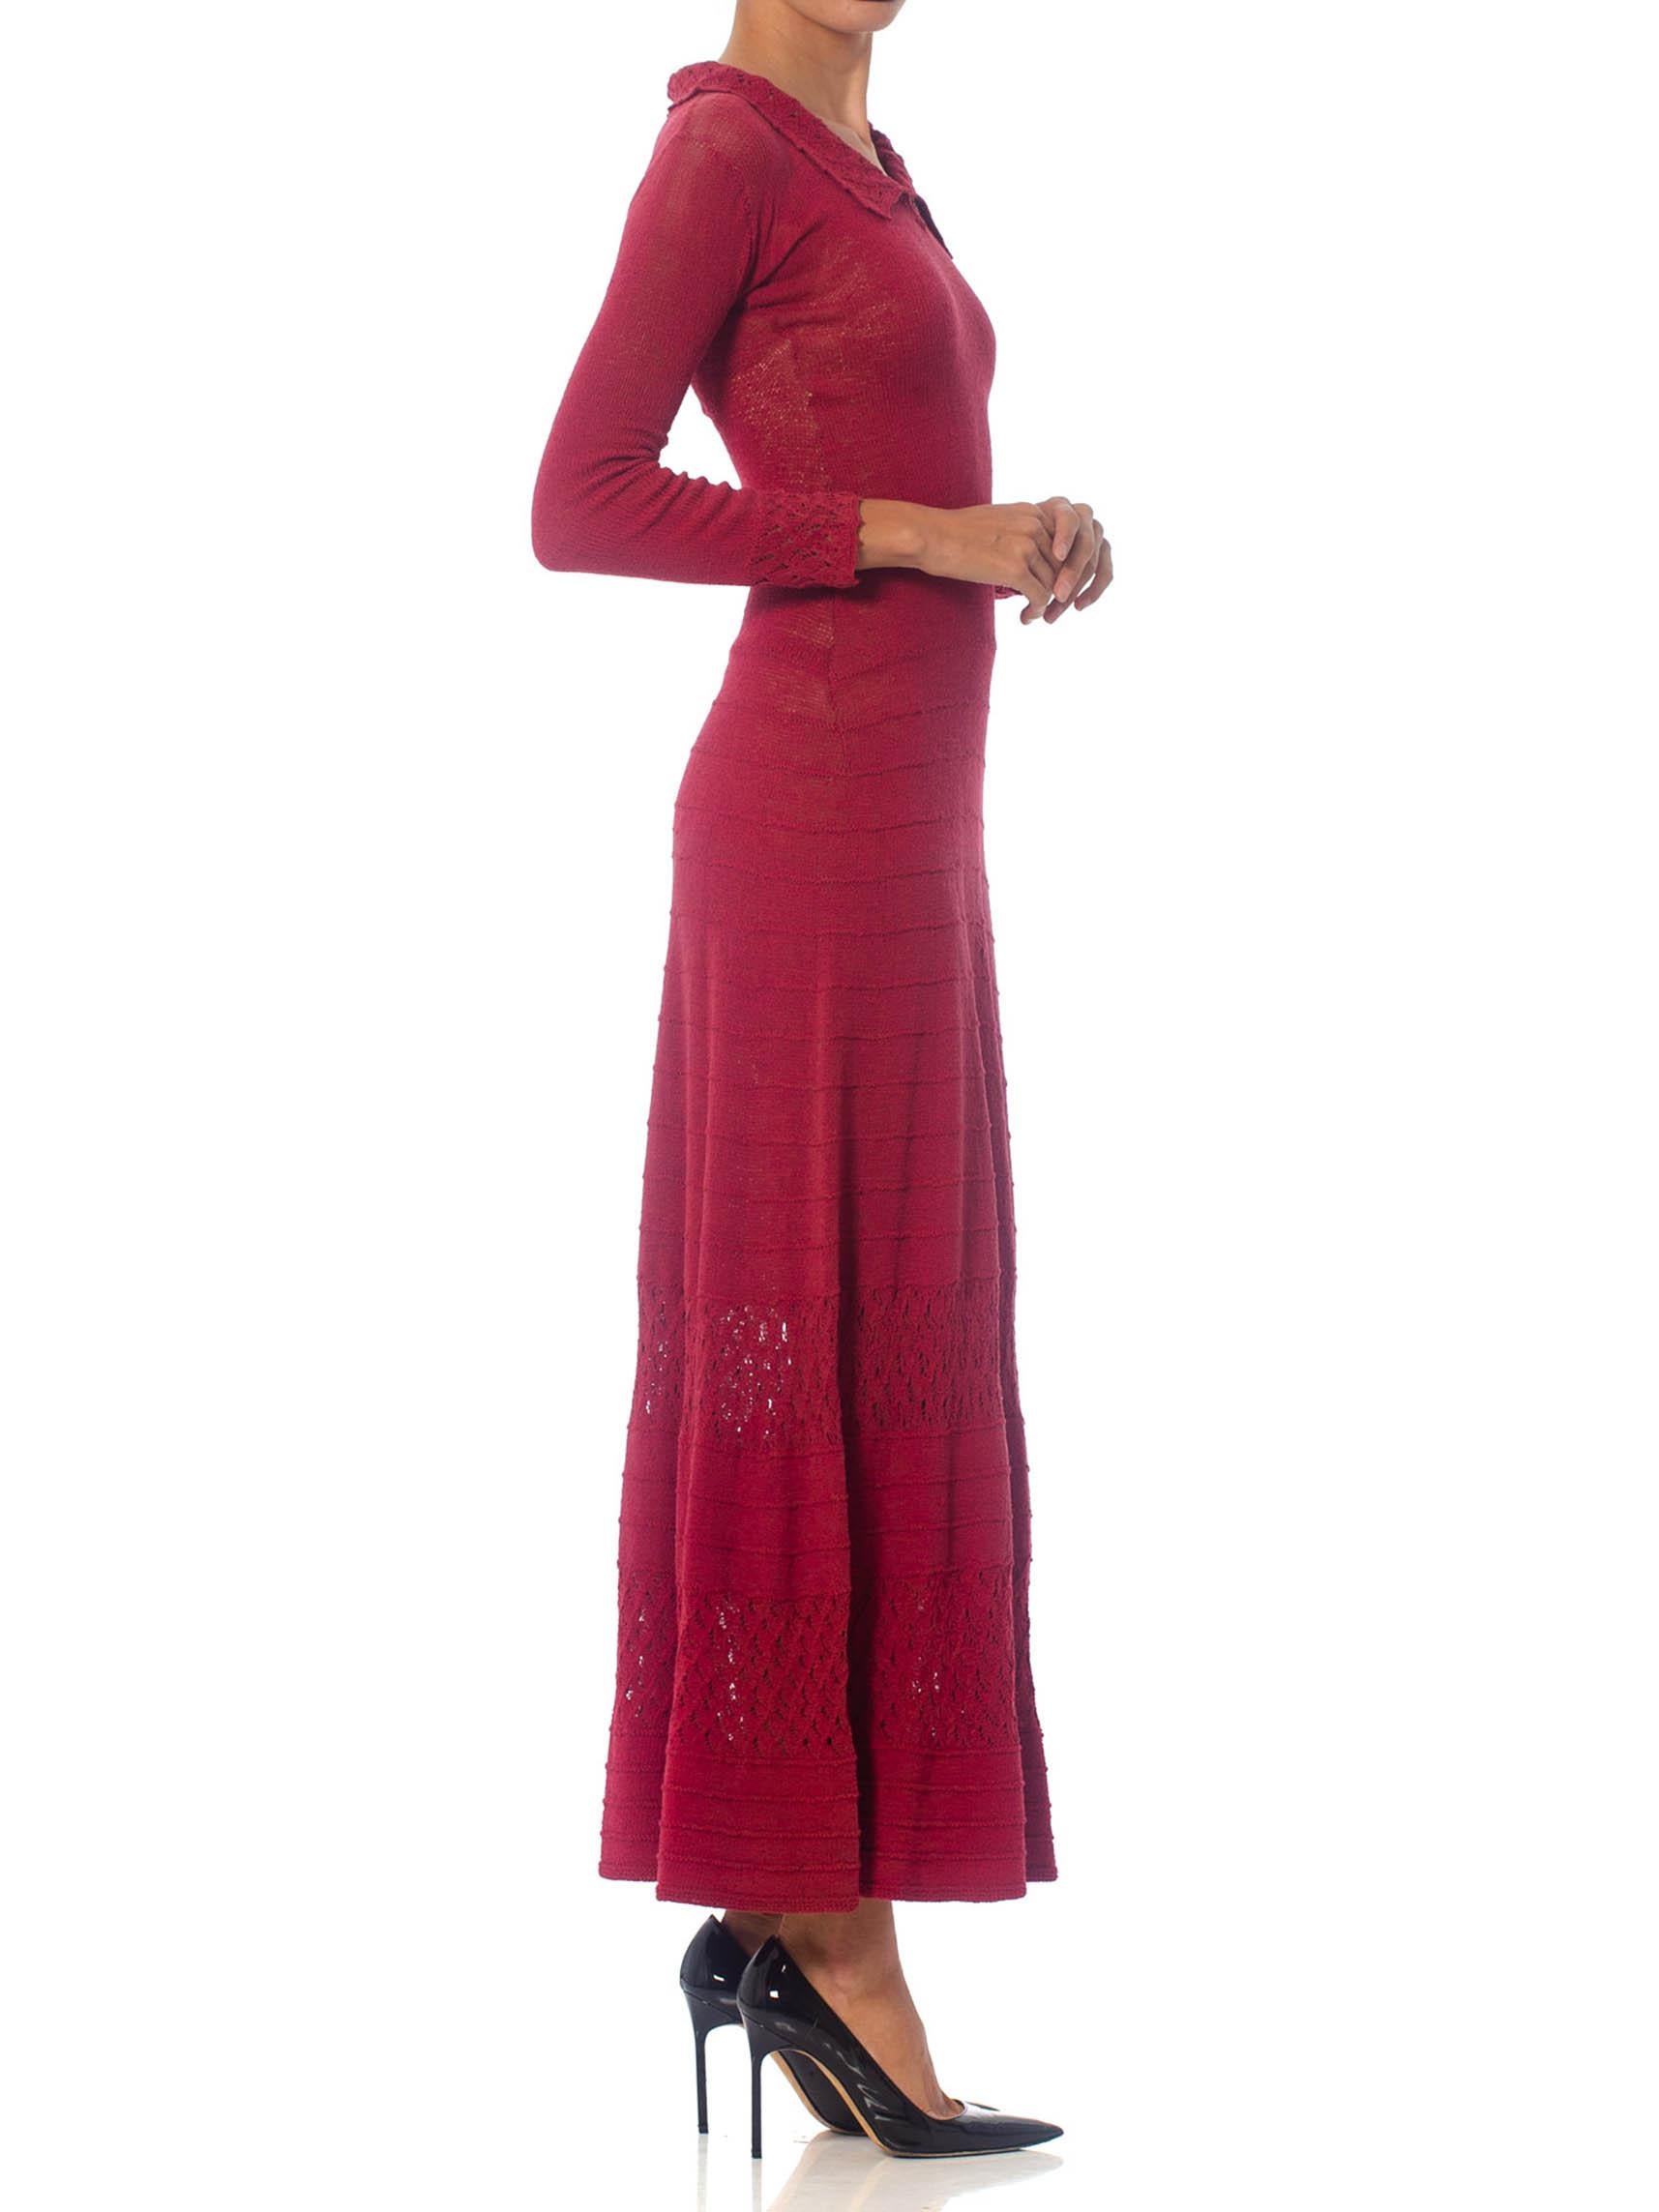 cranberry dresses with sleeves